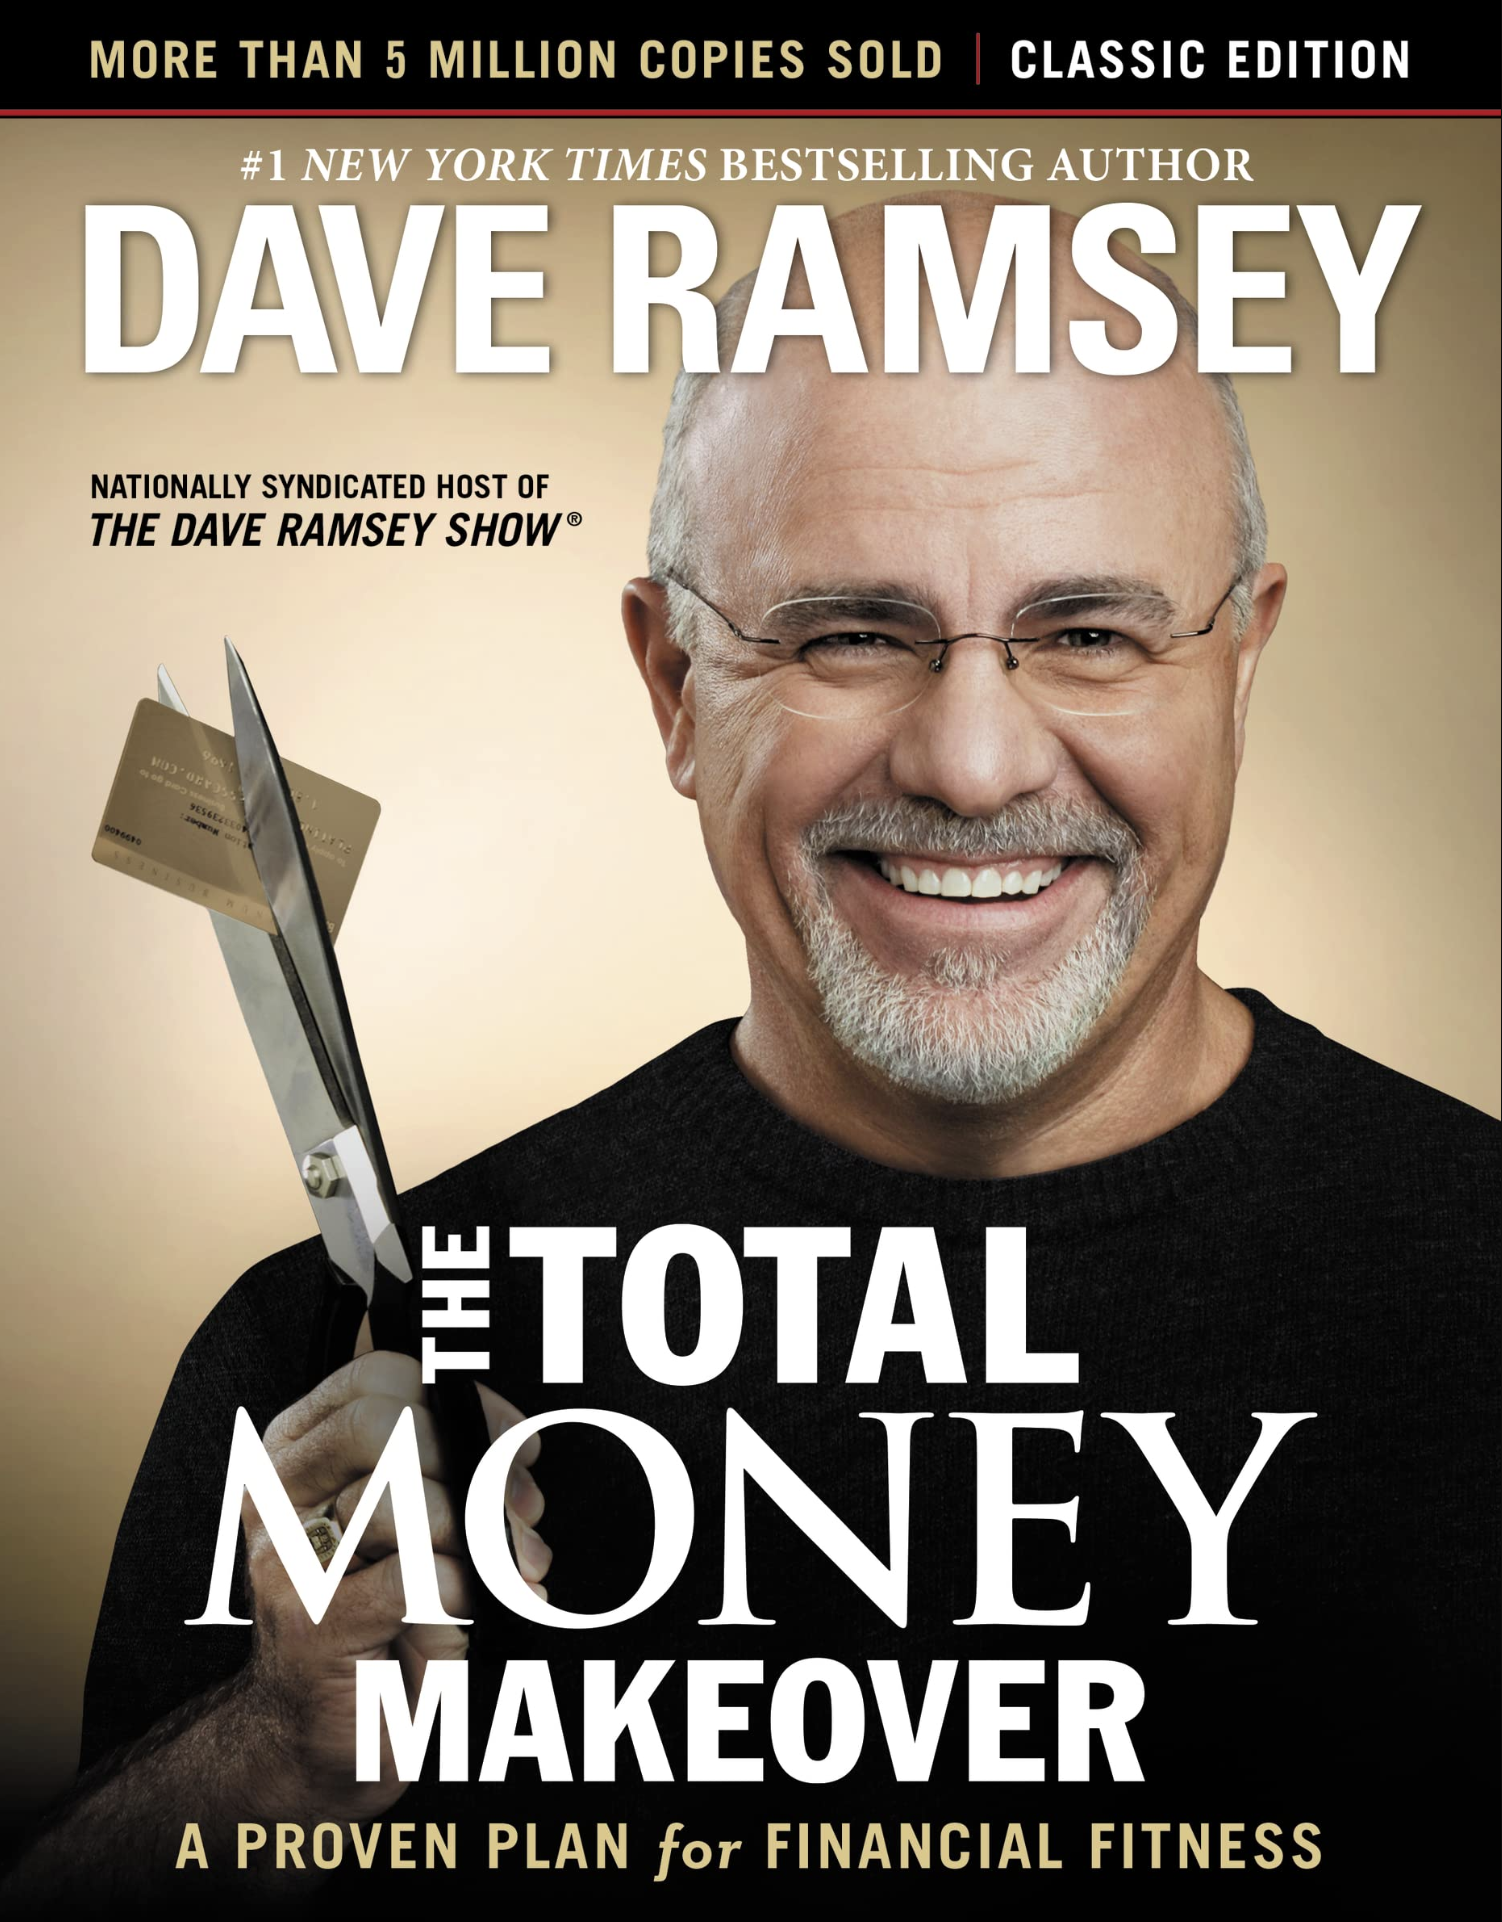 The Total Money Makeover: A Proven Plan for Financial Fitness by Dave Ramsey